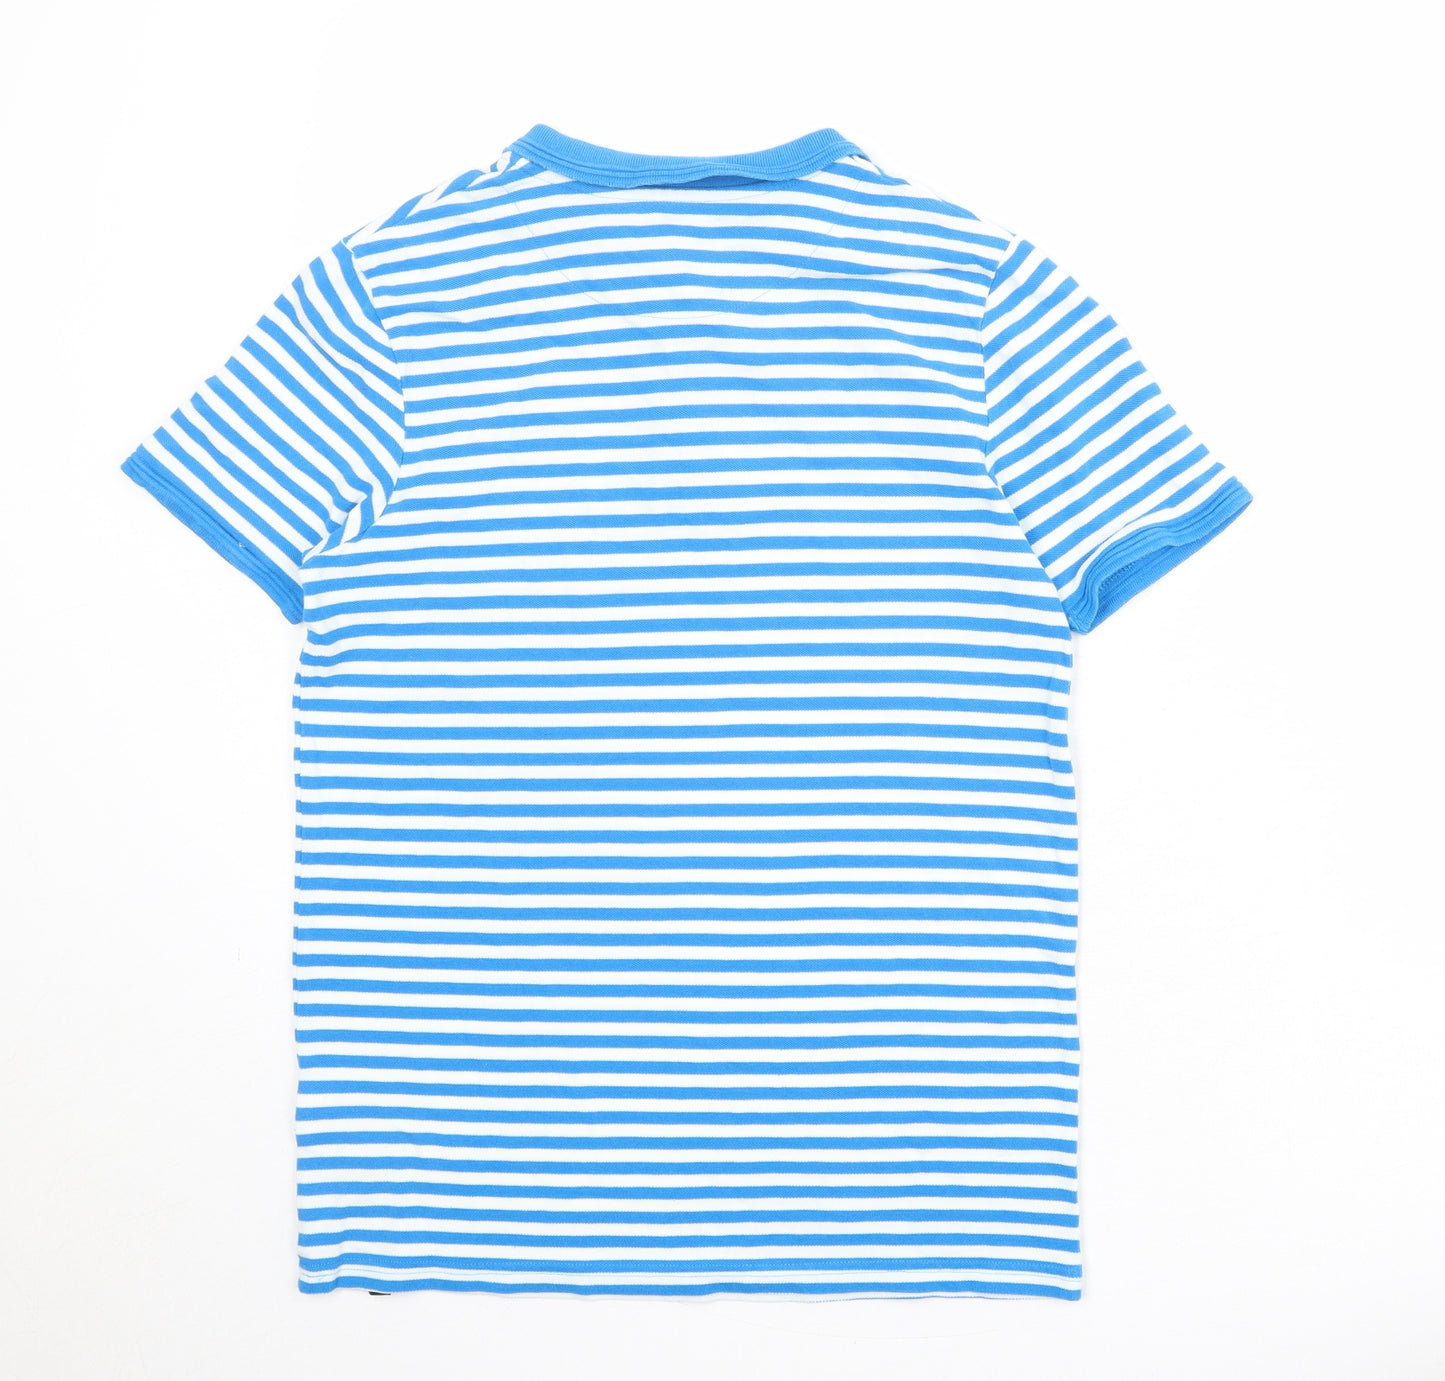 Penguin Boys Blue Striped 100% Cotton Basic Polo Size 14-15 Years Collared Button